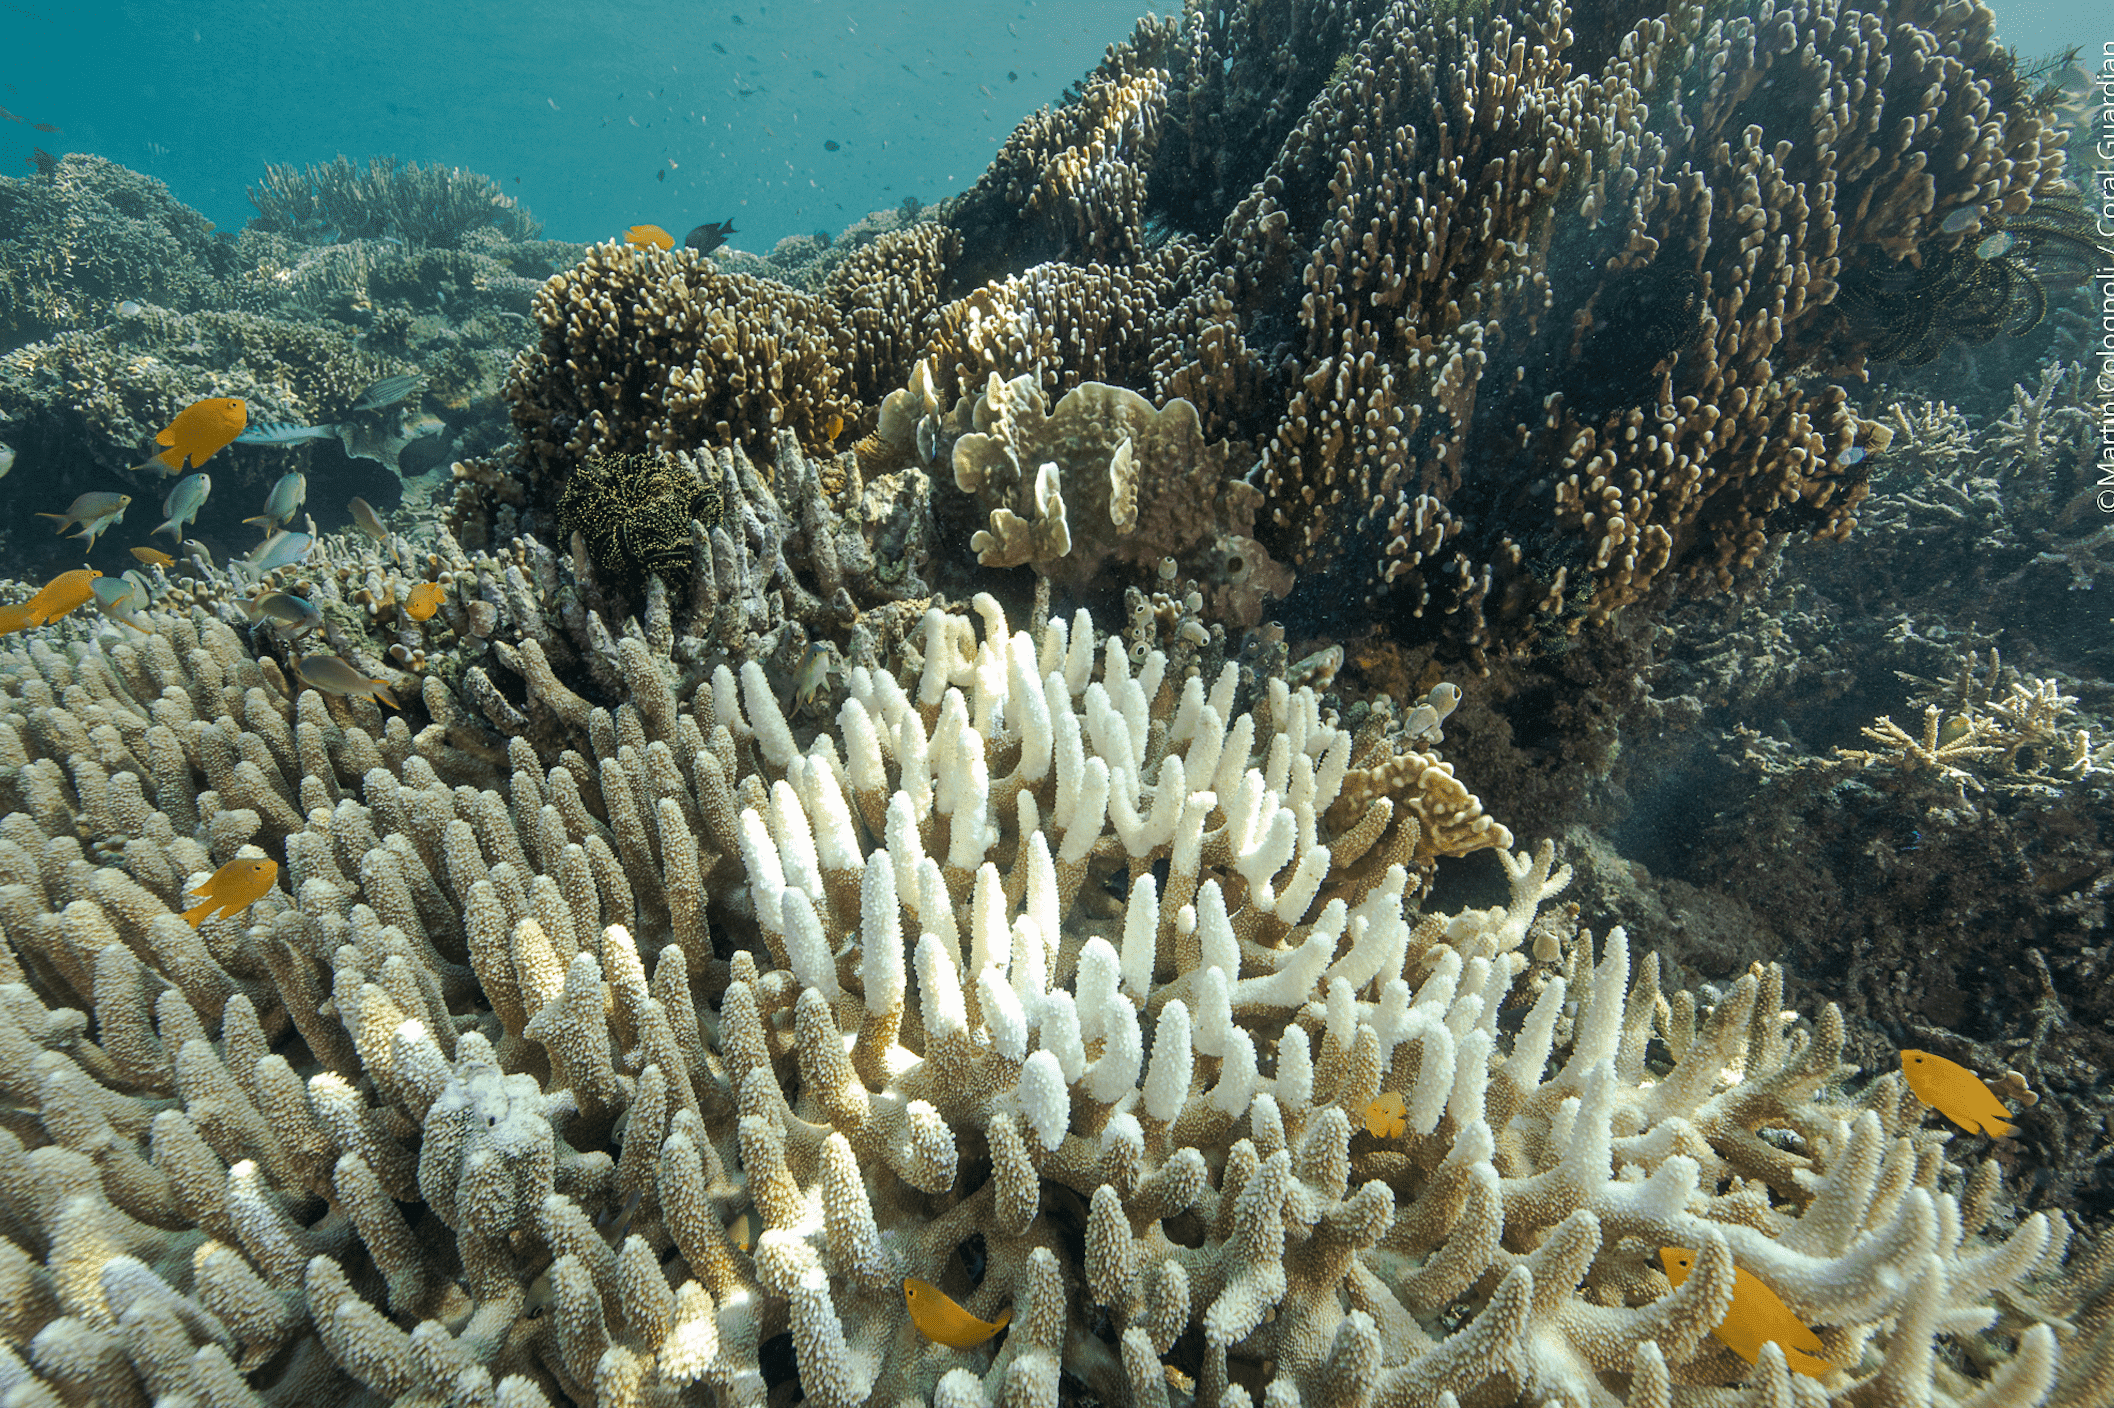 Could reducing human impacts in land and at sea help coral reefs during heat waves?